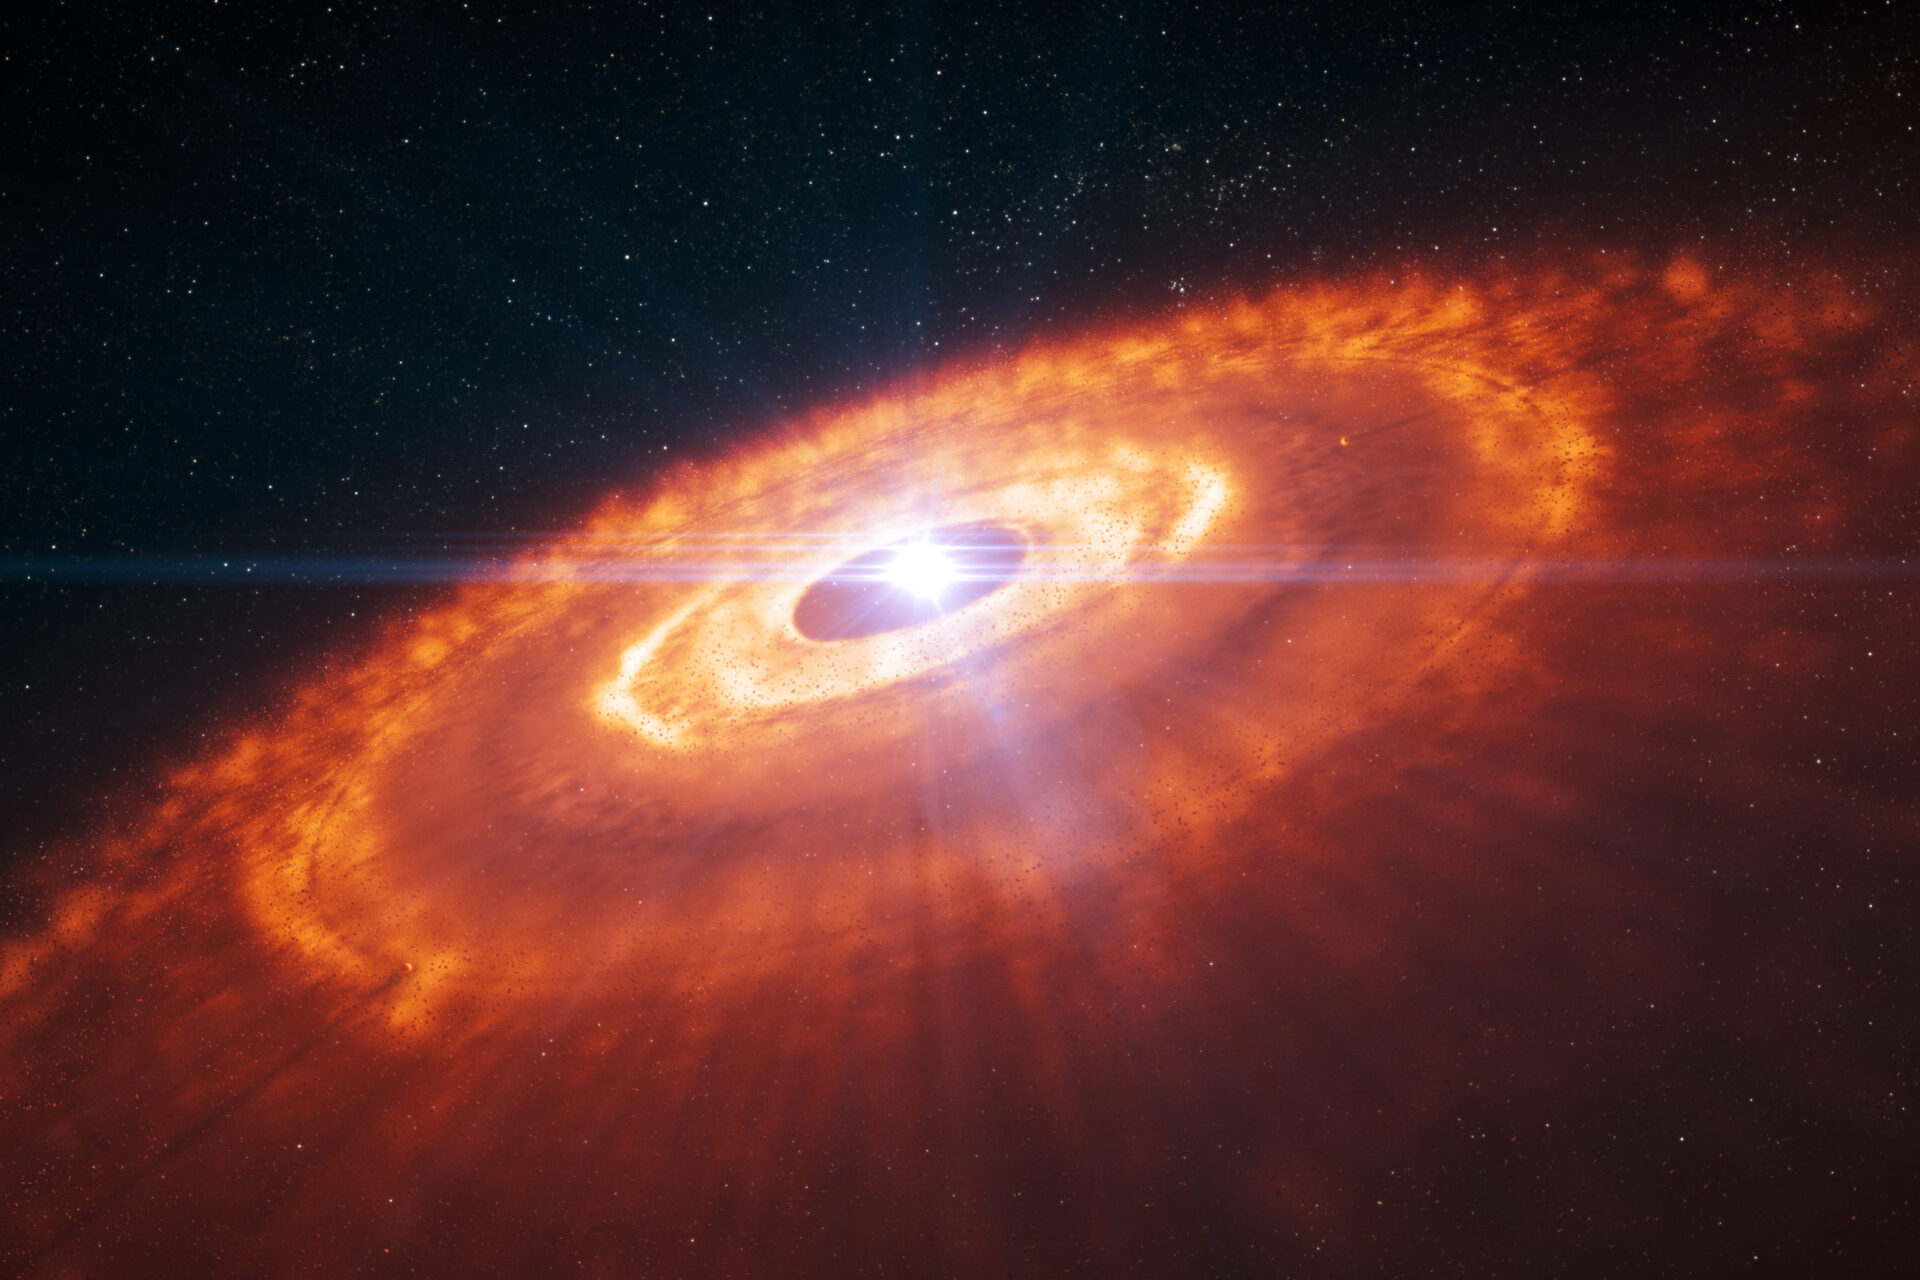 <p>This is an artist’s impression of a young star surrounded by a protoplanetary disc in which planets are forming. Using ALMA’s 15-kilometre baseline astronomers were able to make the first detailed image of a protoplanetary disc, which revealed the complex structure of the disc. Concentric rings of gas, with gaps indicating planet formation, are visible in this artist’s impression and were predicted by computer simulations. Now these structures have been observed by ALMA for the first time. Credit: ESO/L. Calçada</p>
